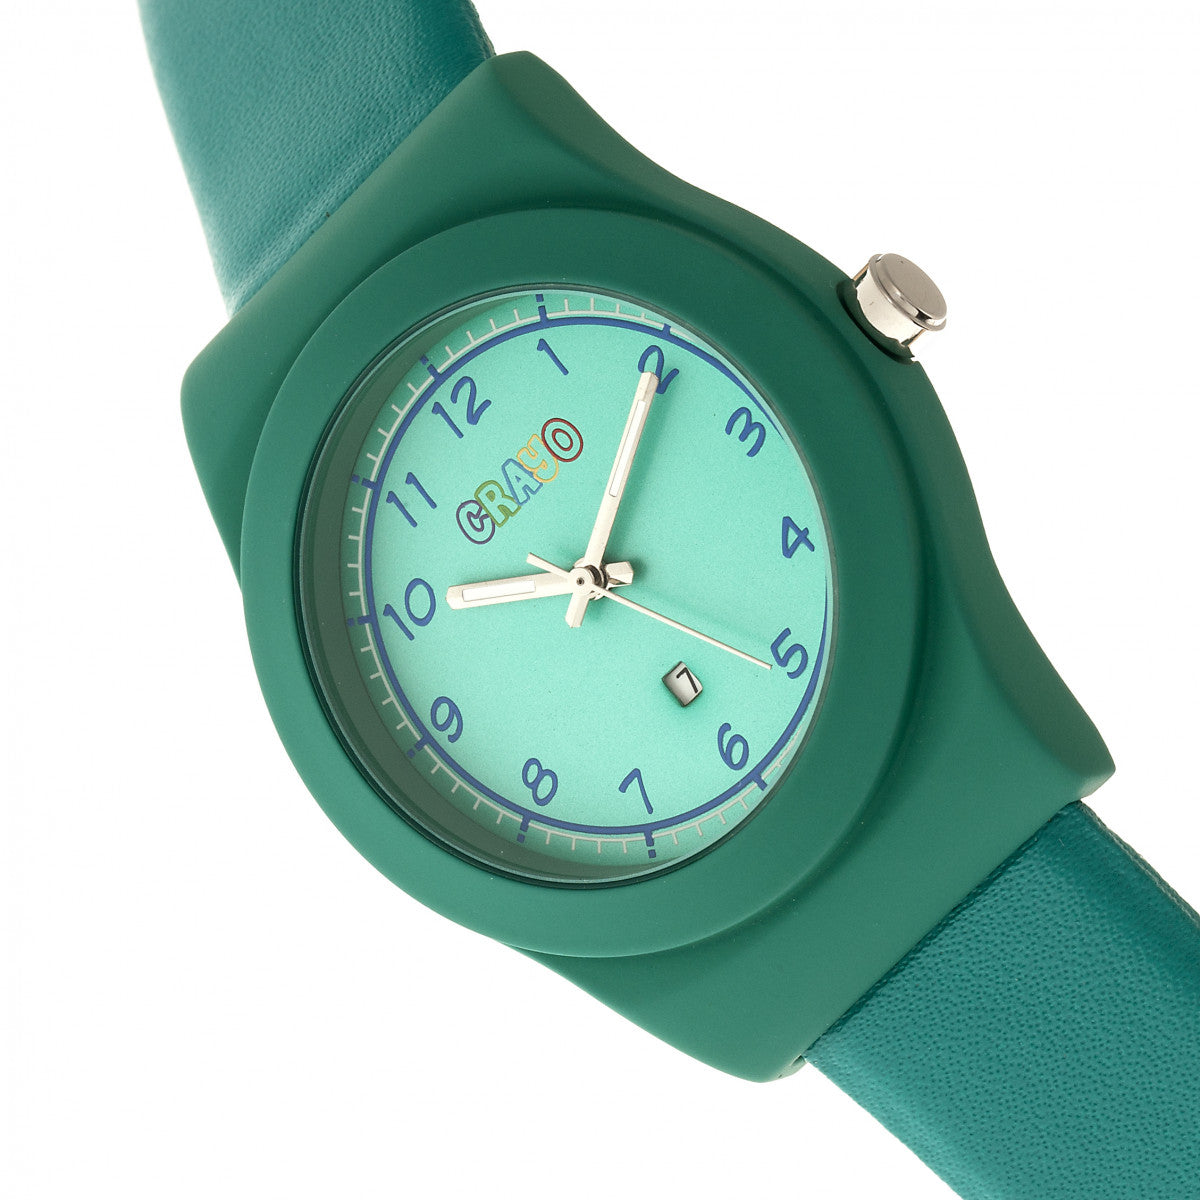 Crayo Dazzle Leather-Band Watch w/Date - Teal - CRACR4102